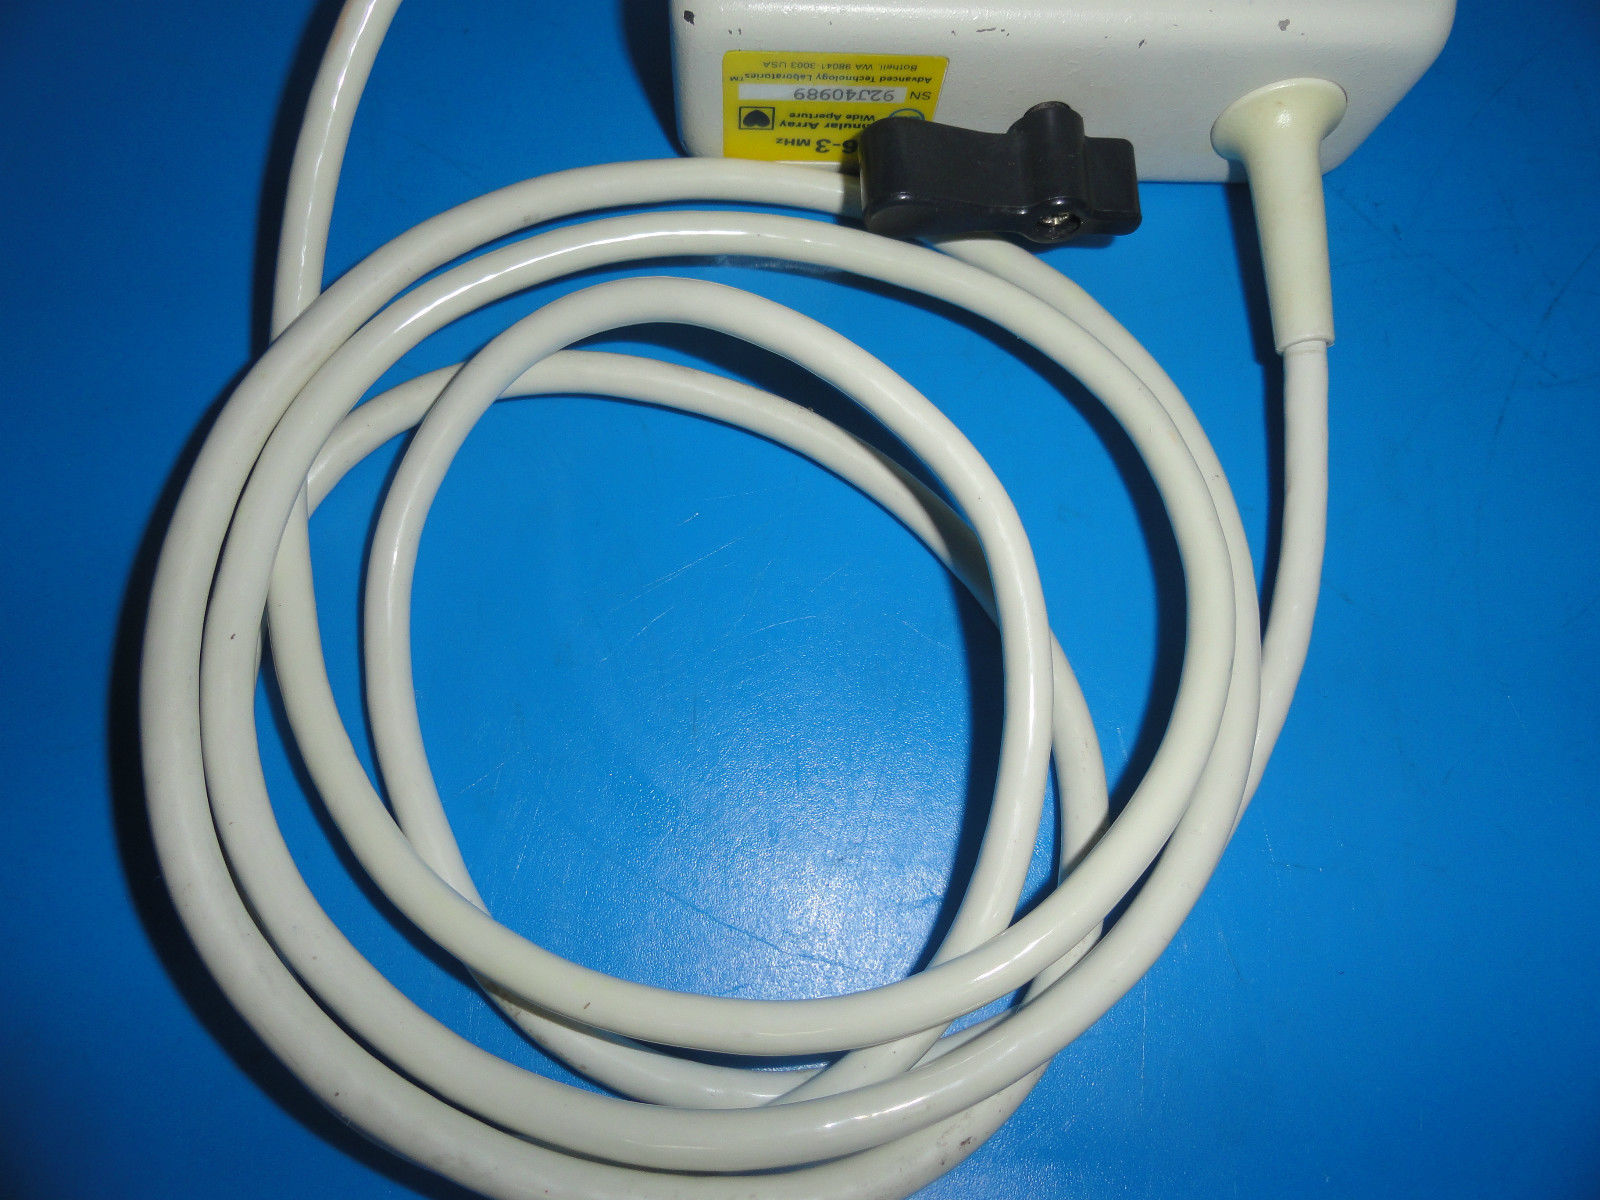 ATL A6-3 Annular Array 3.0 to 6.0MHz Wide Aperature  Probe for UM9 HDI (3717) DIAGNOSTIC ULTRASOUND MACHINES FOR SALE